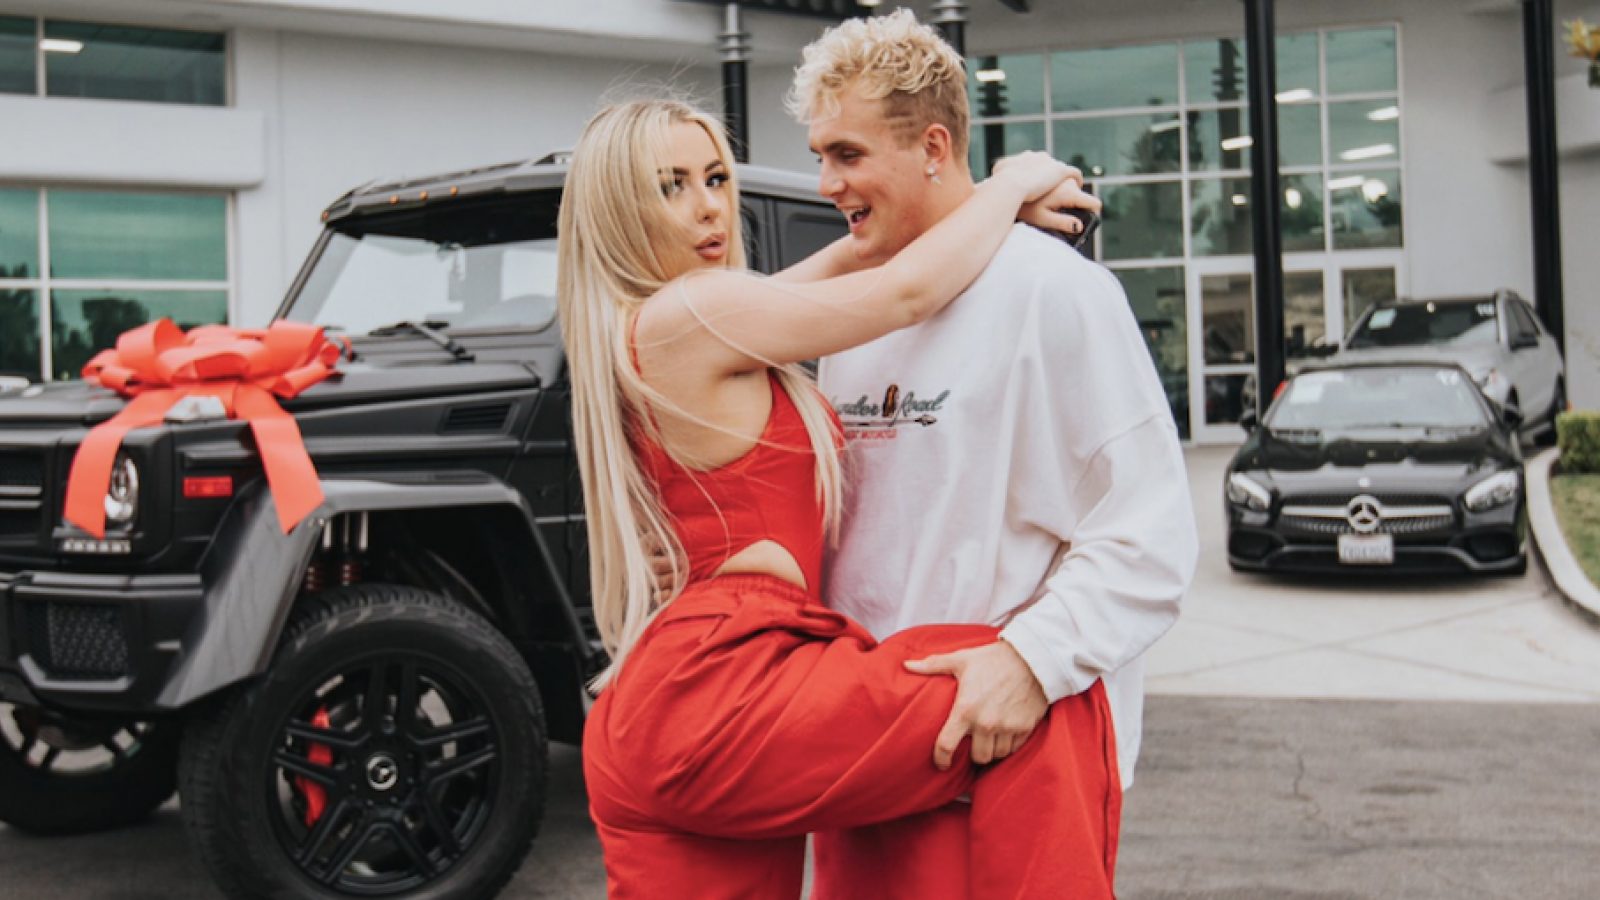 Jake Paul And Tana Mongeau Engaged After R Proposes In